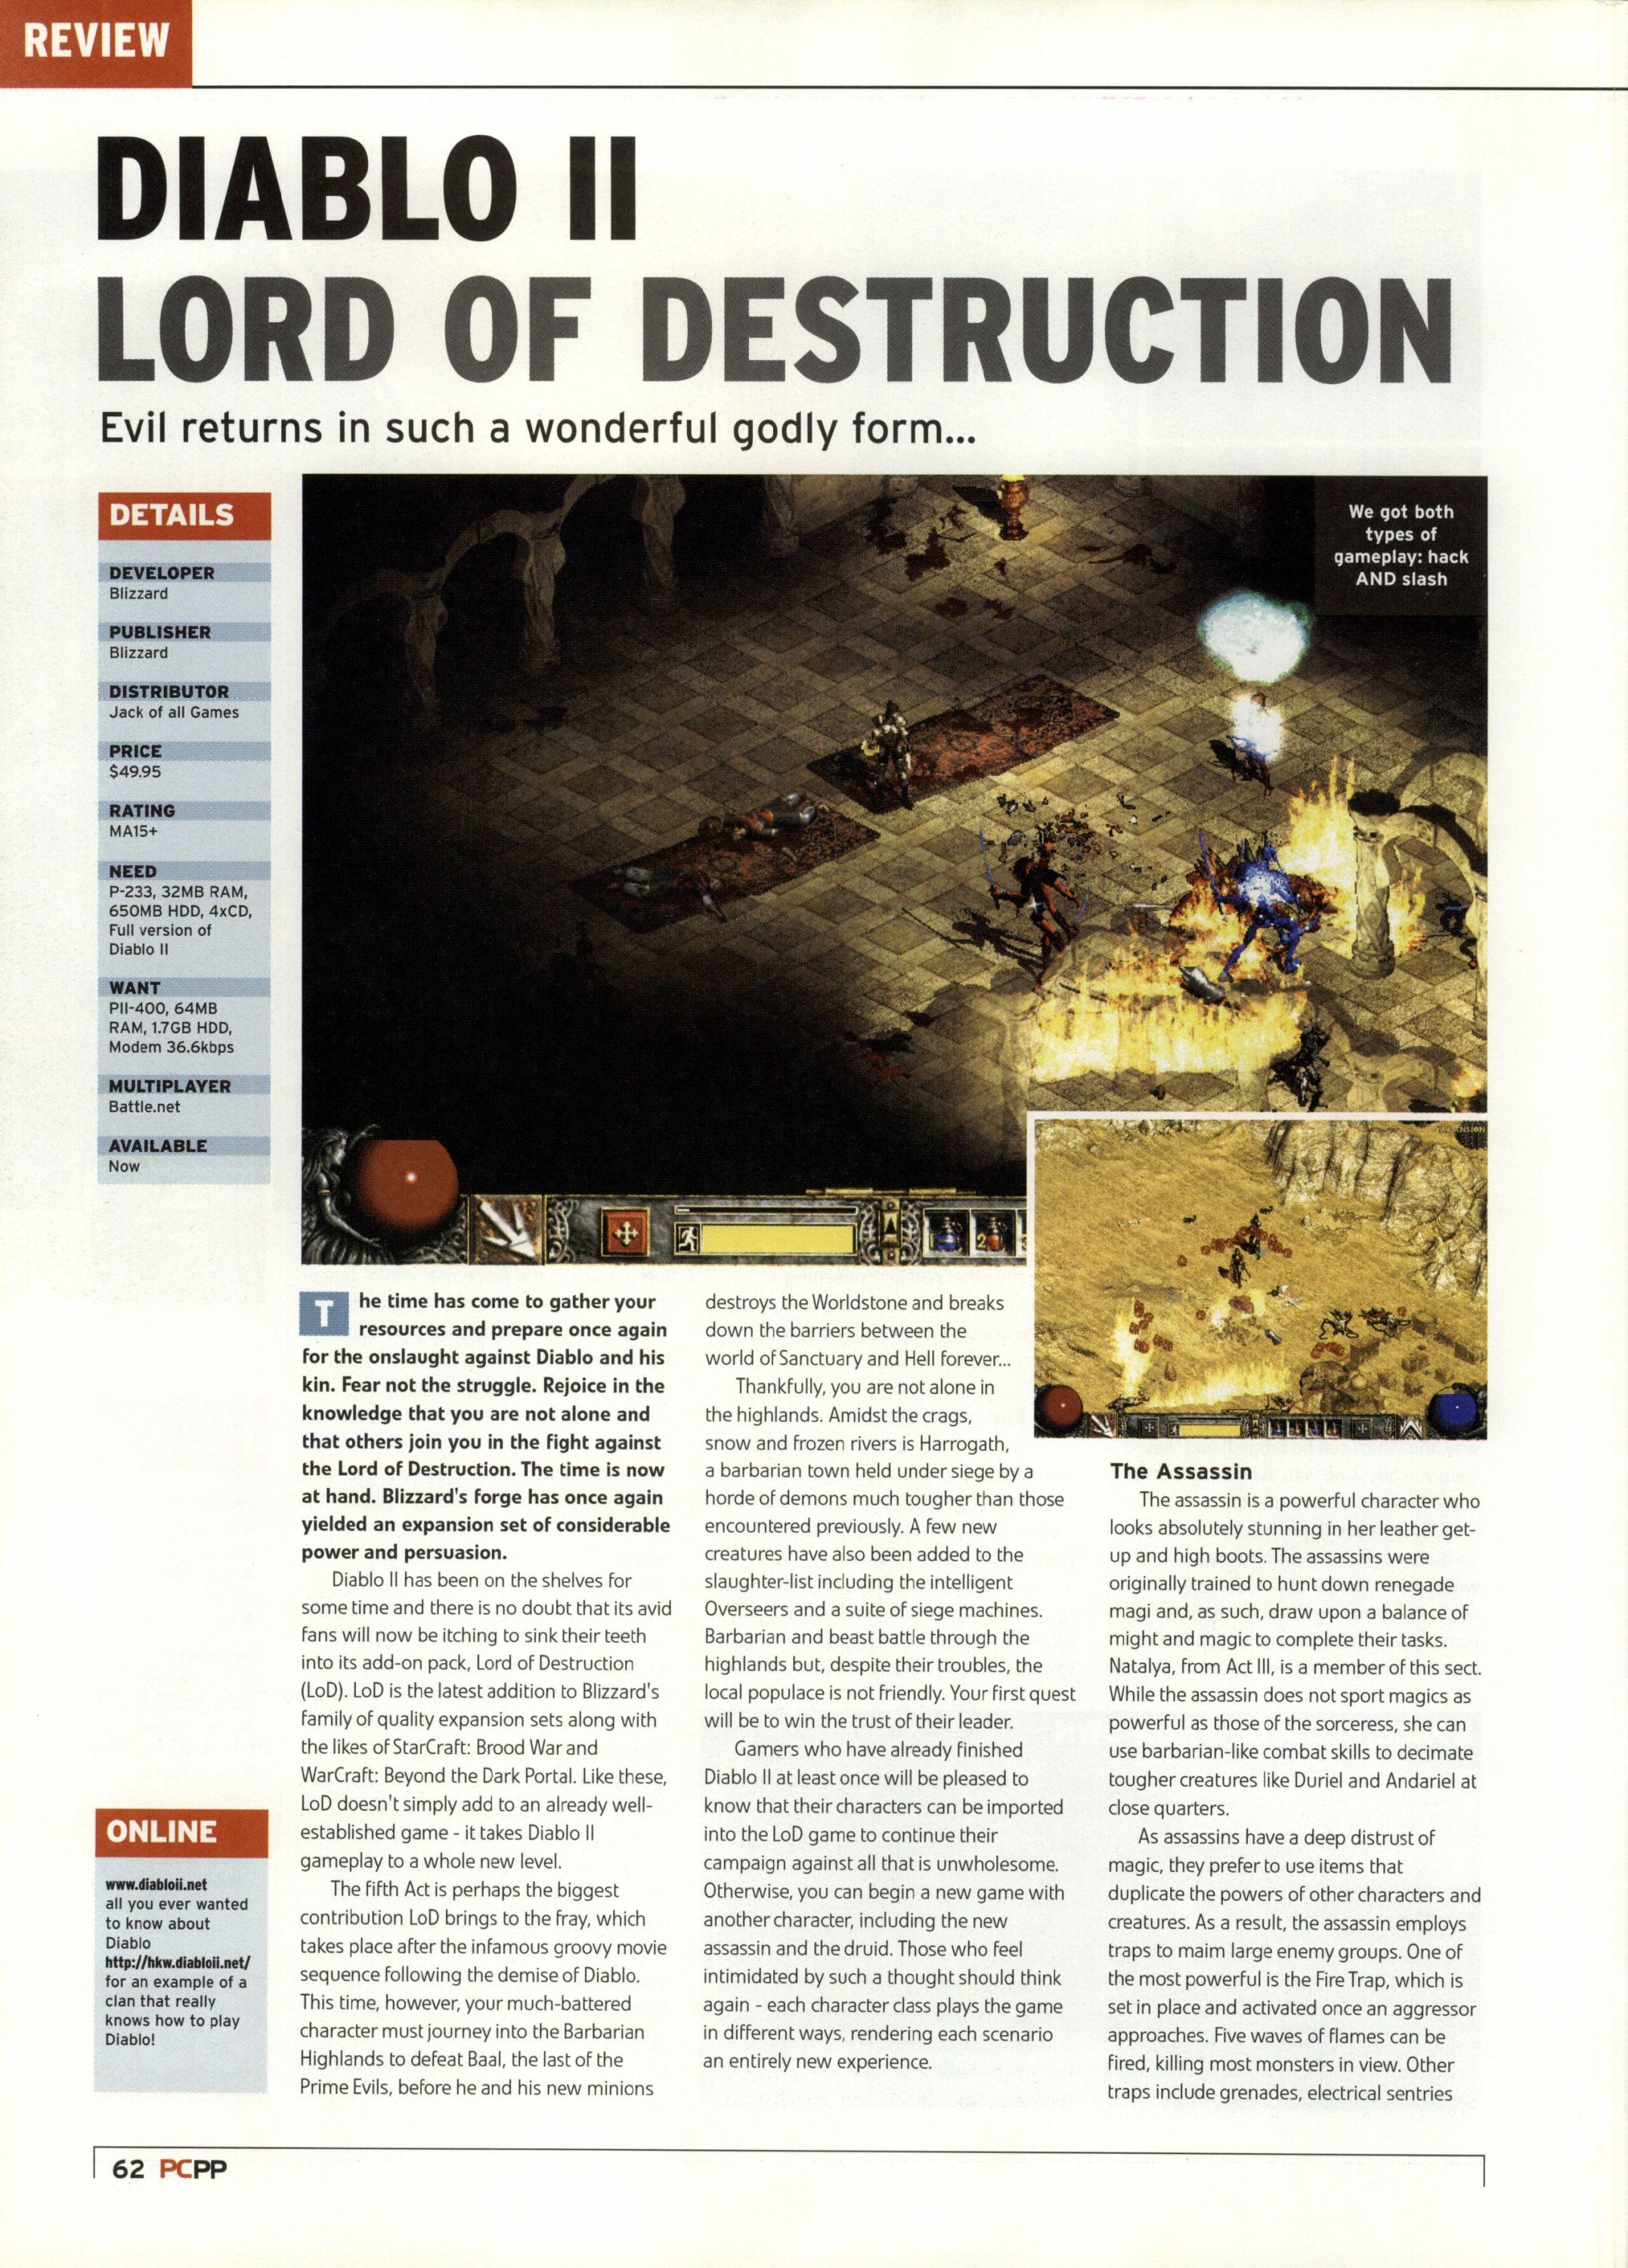 PC Powerplay Lord of Destruction review